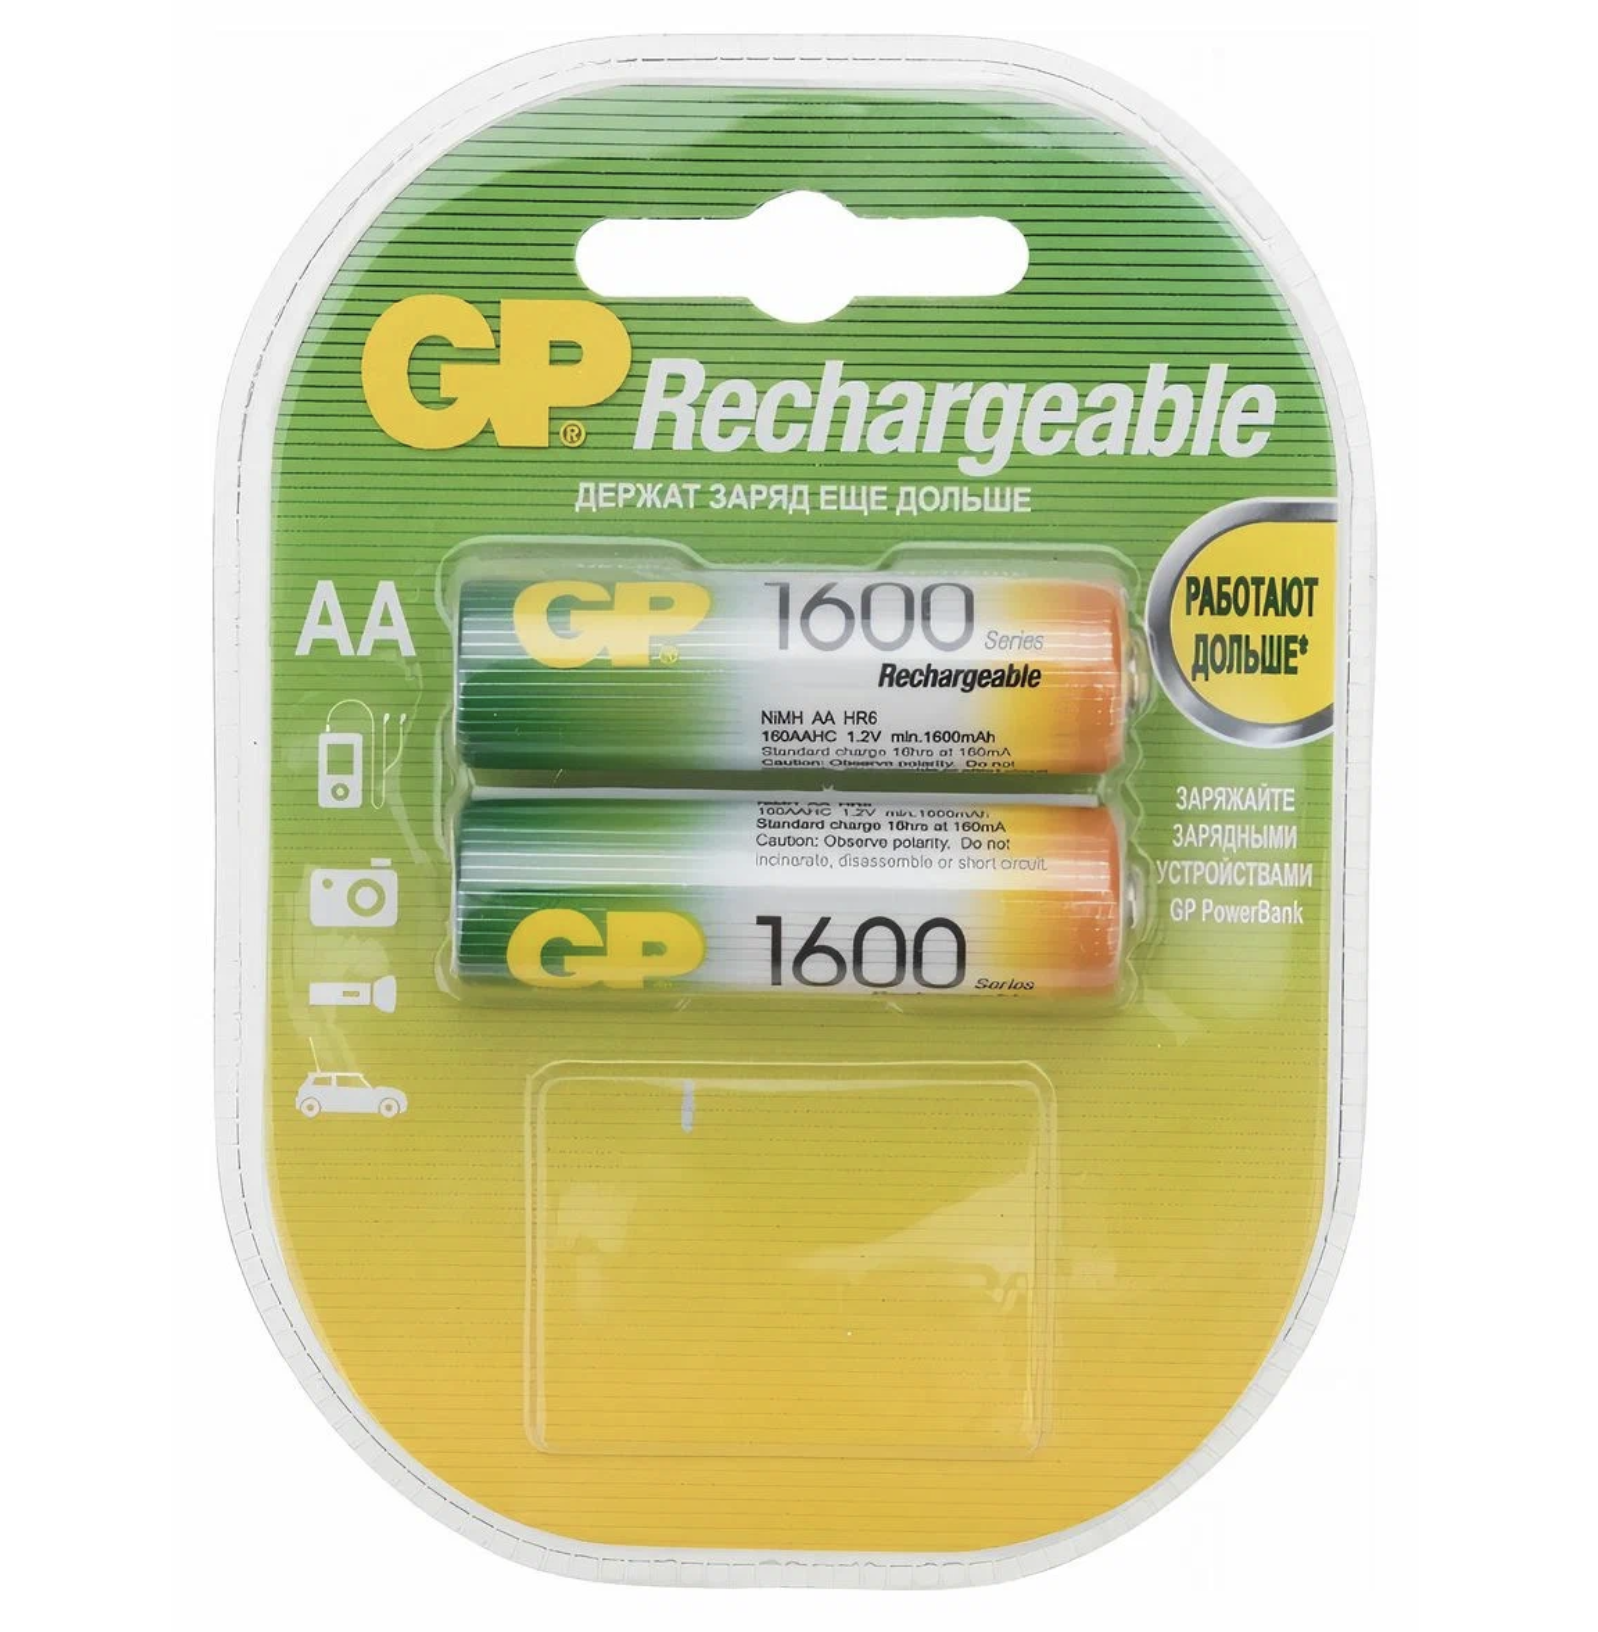  GP -  Rechargeable AA 1600 / 160AAHC 2 